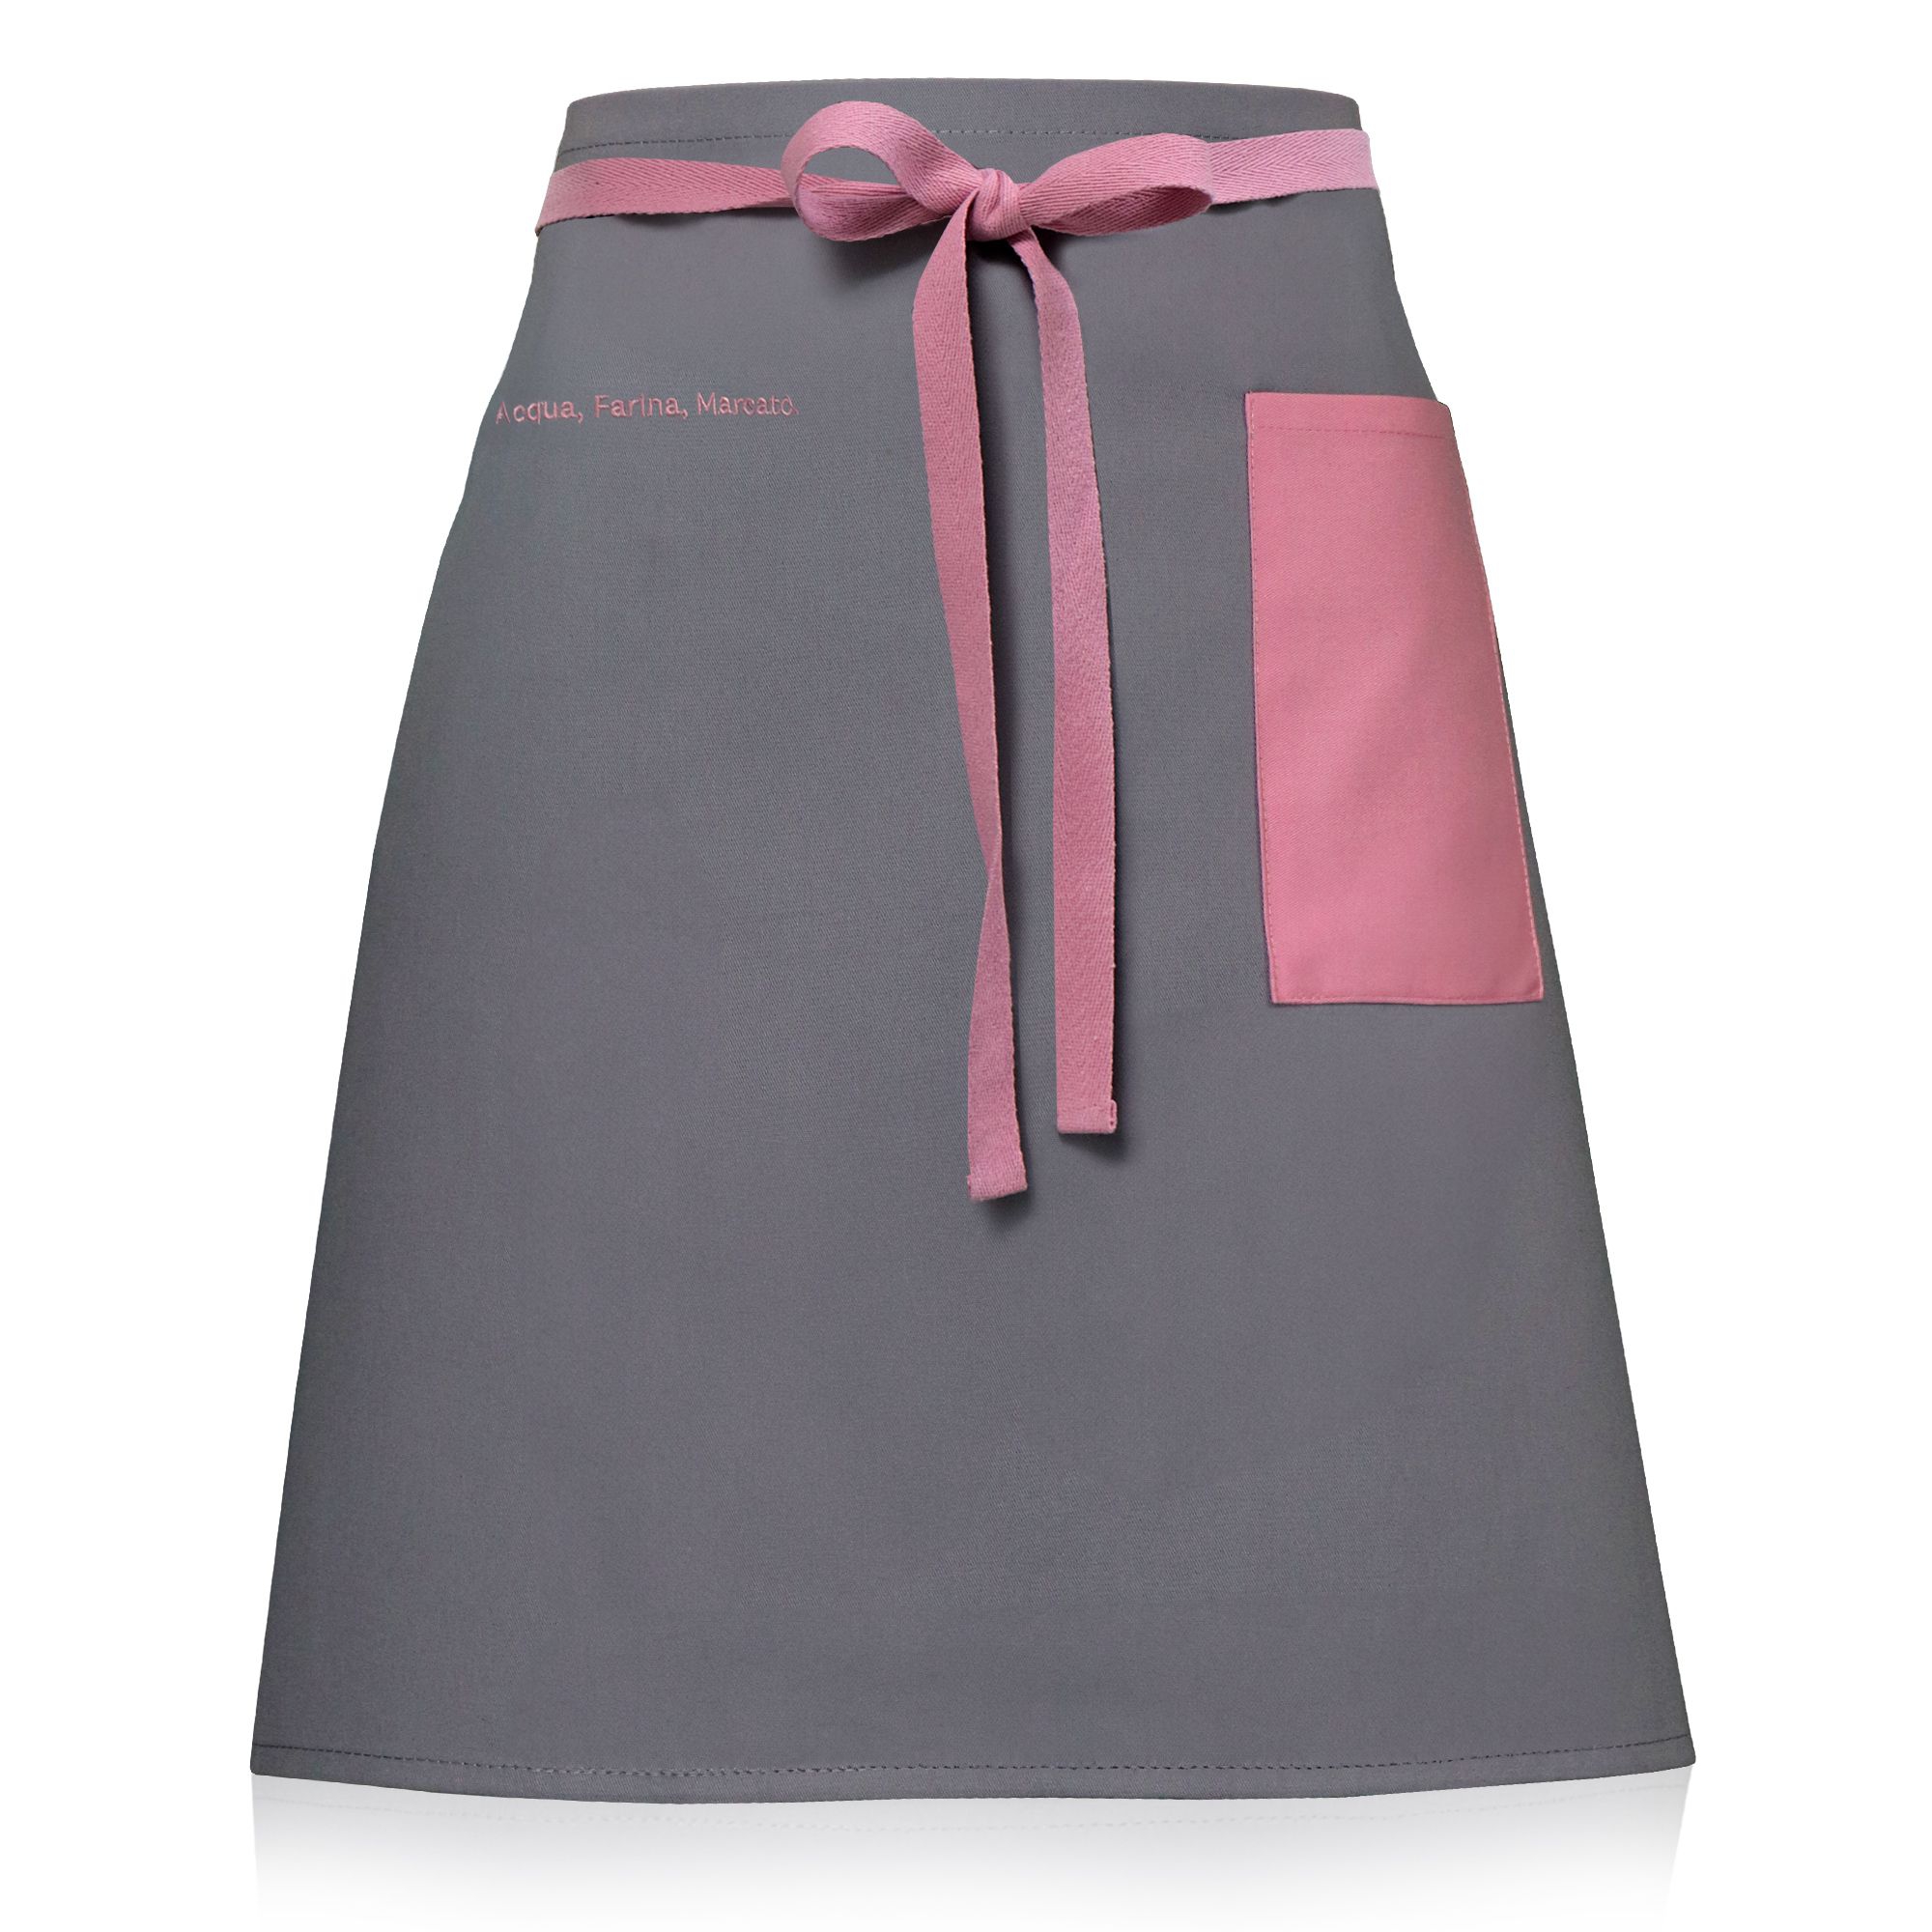 Marcato - Apron with pink pocket